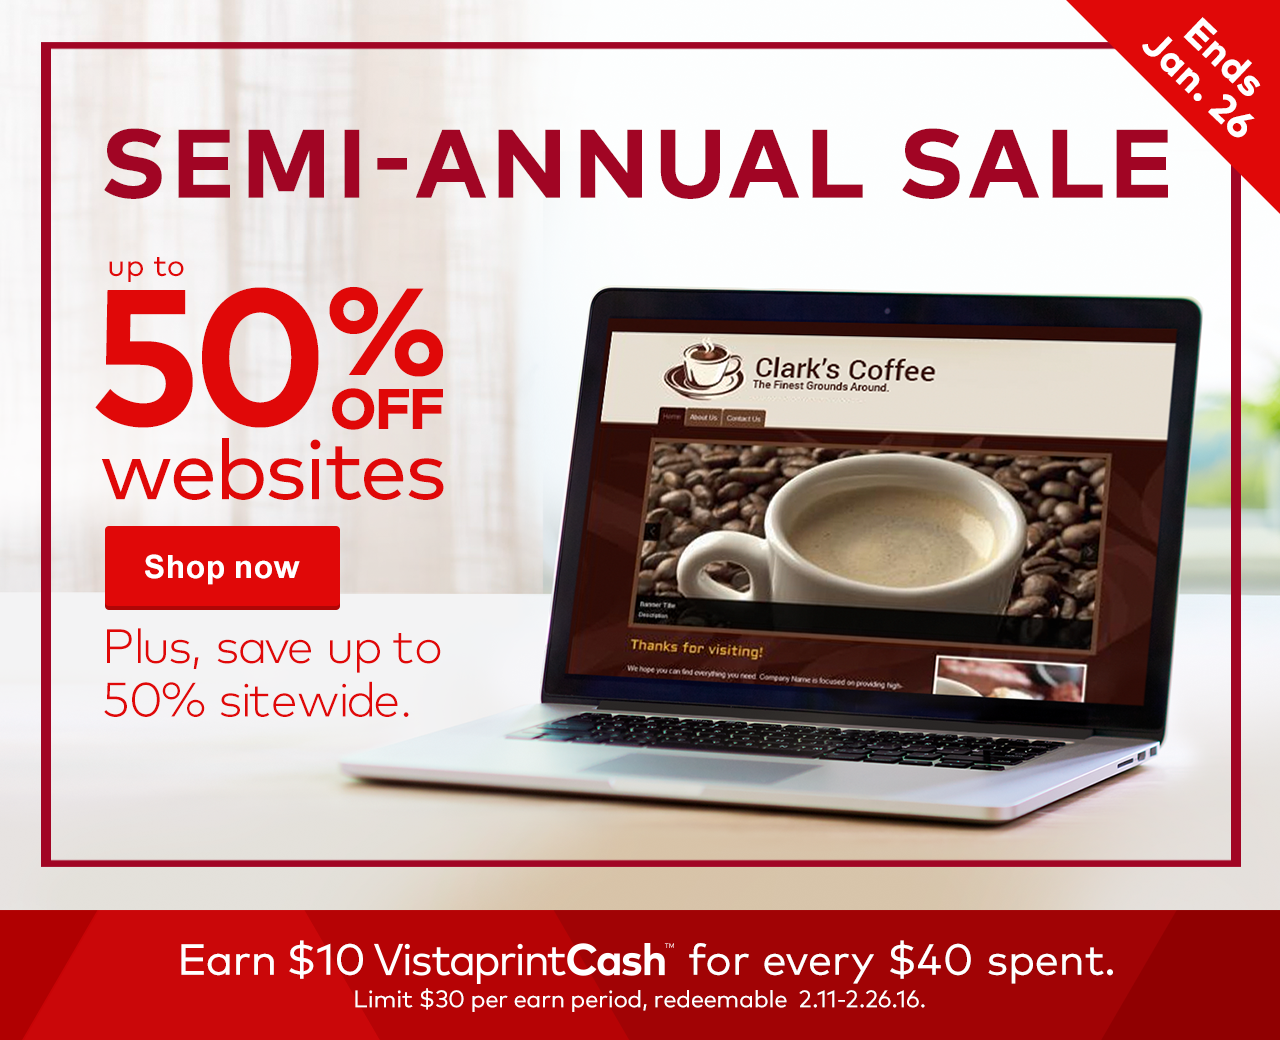 Vistaprint SemiAnnual Sale ☰ up to 50 off websites ☰ Limited time